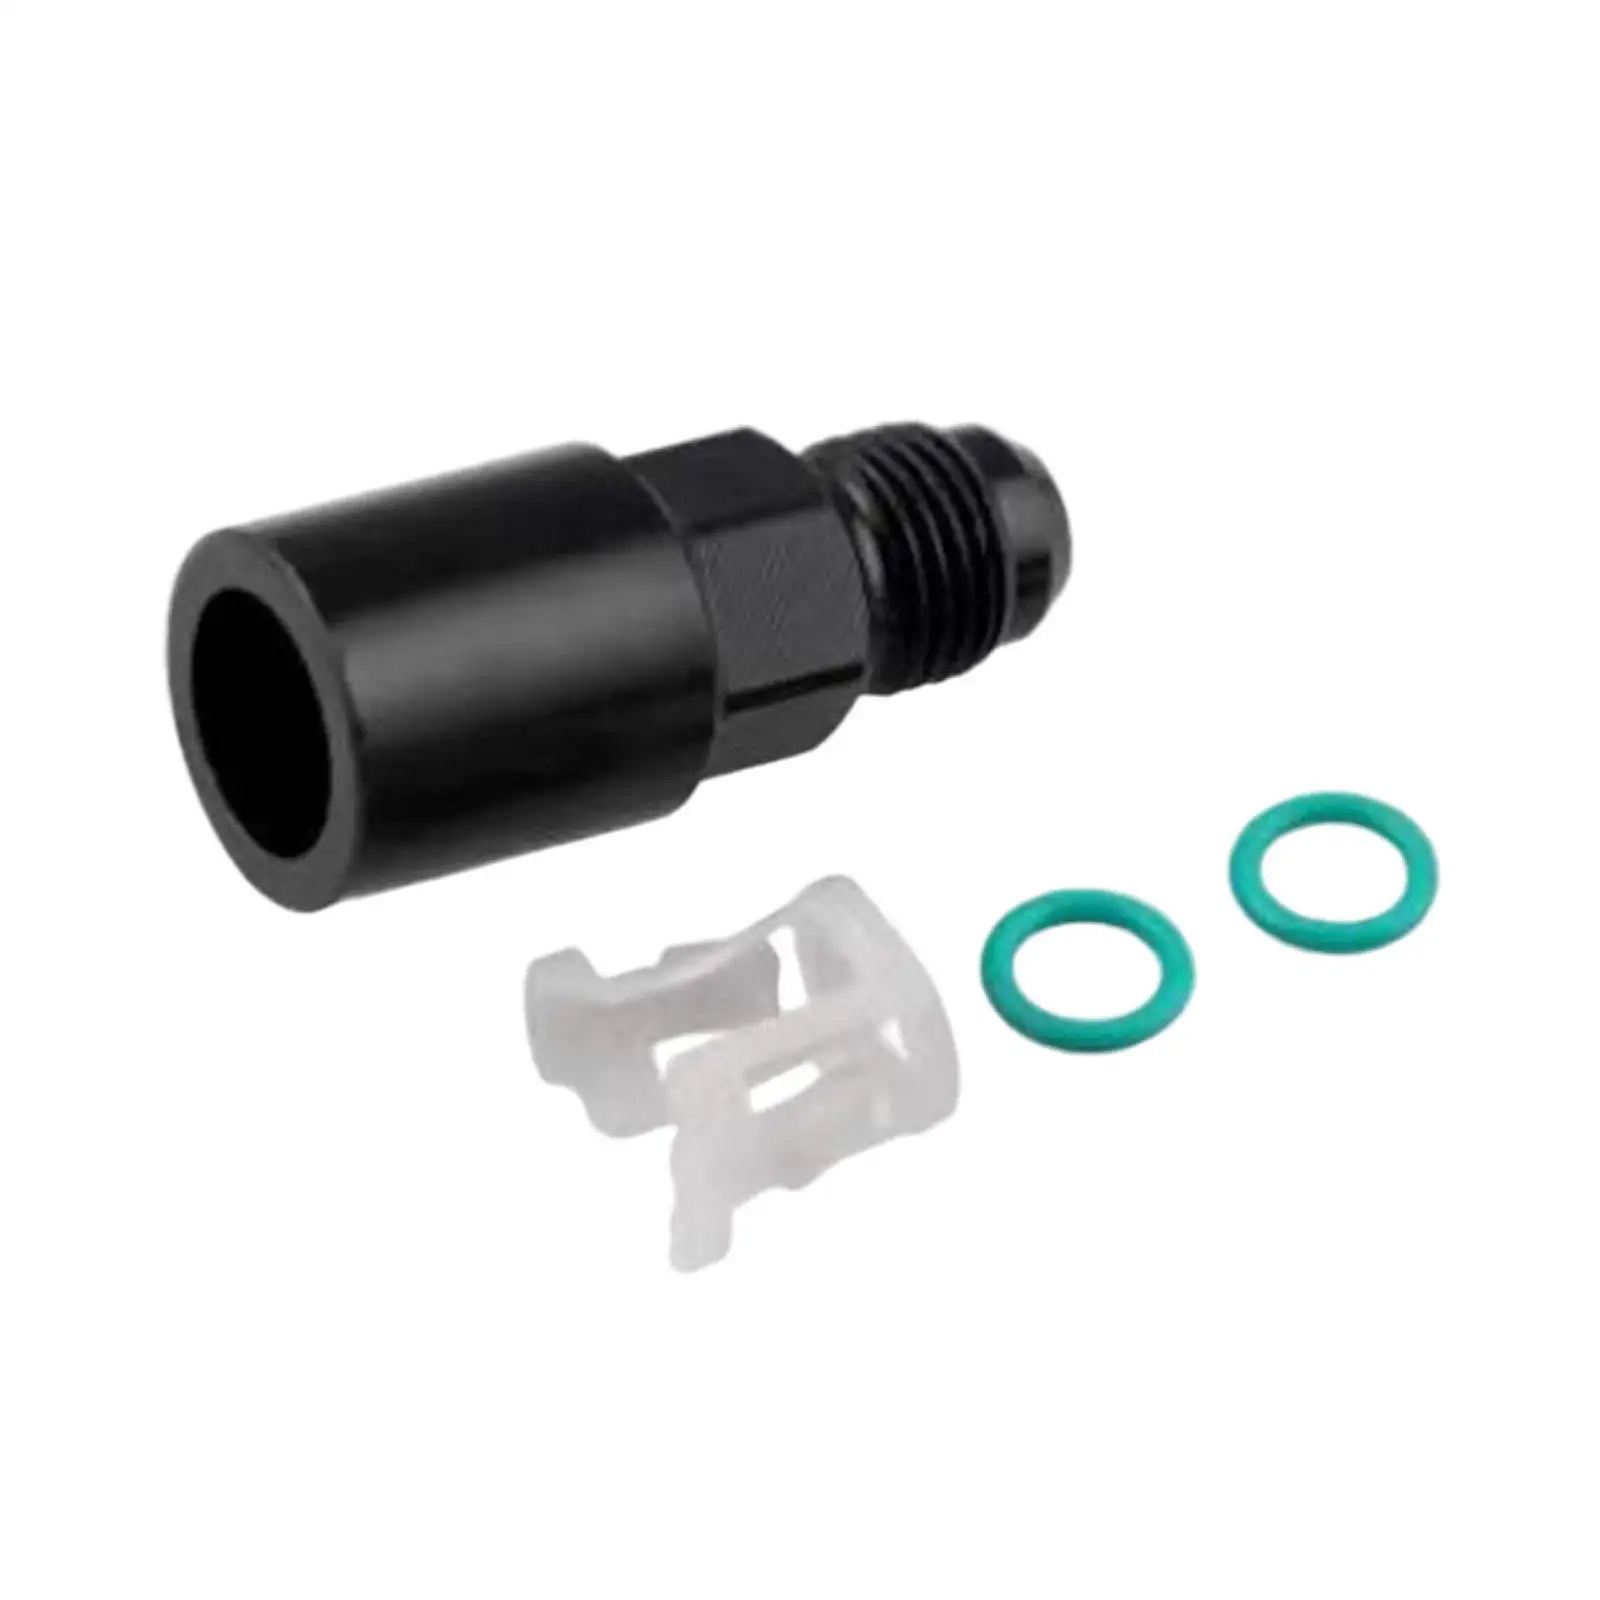 Fuel Adapter Fitting 6AN to 5/16 GM Quick Connect Black Oil Line Swivel Pipe Adapter Fit for Fuel Rail Quick Connect Fitting